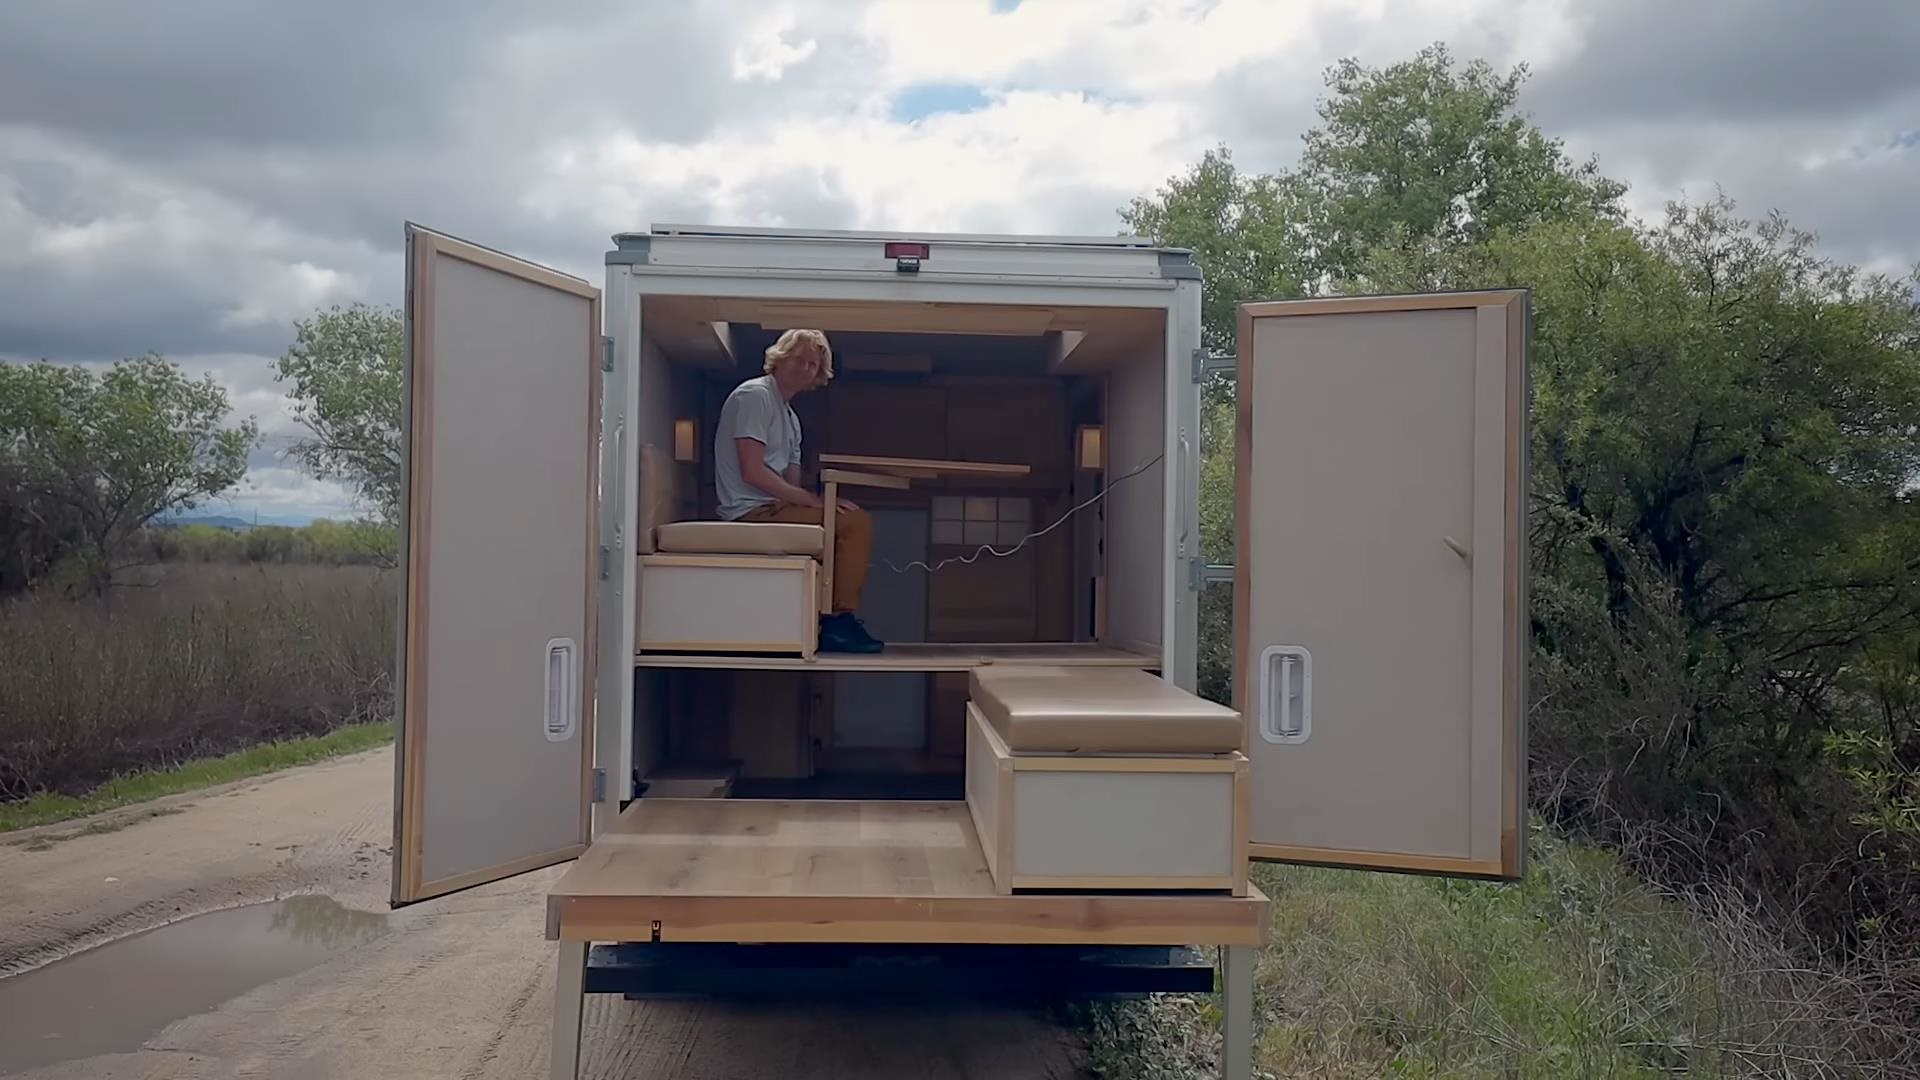 An inconspicuous truck bed hides a game-changing design with a unique desk